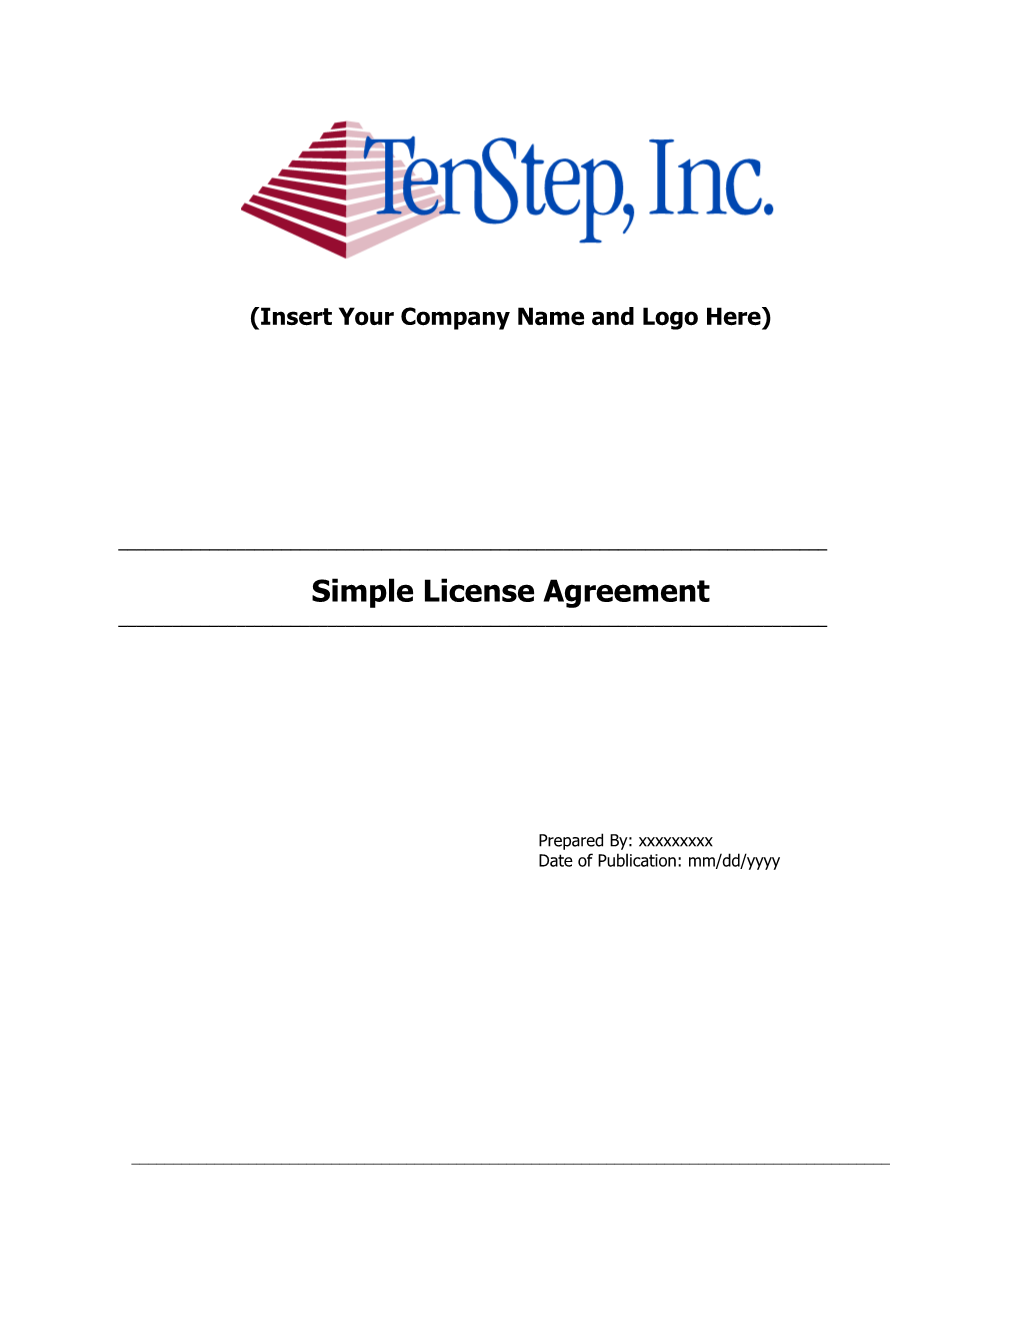 Simple License Agreement